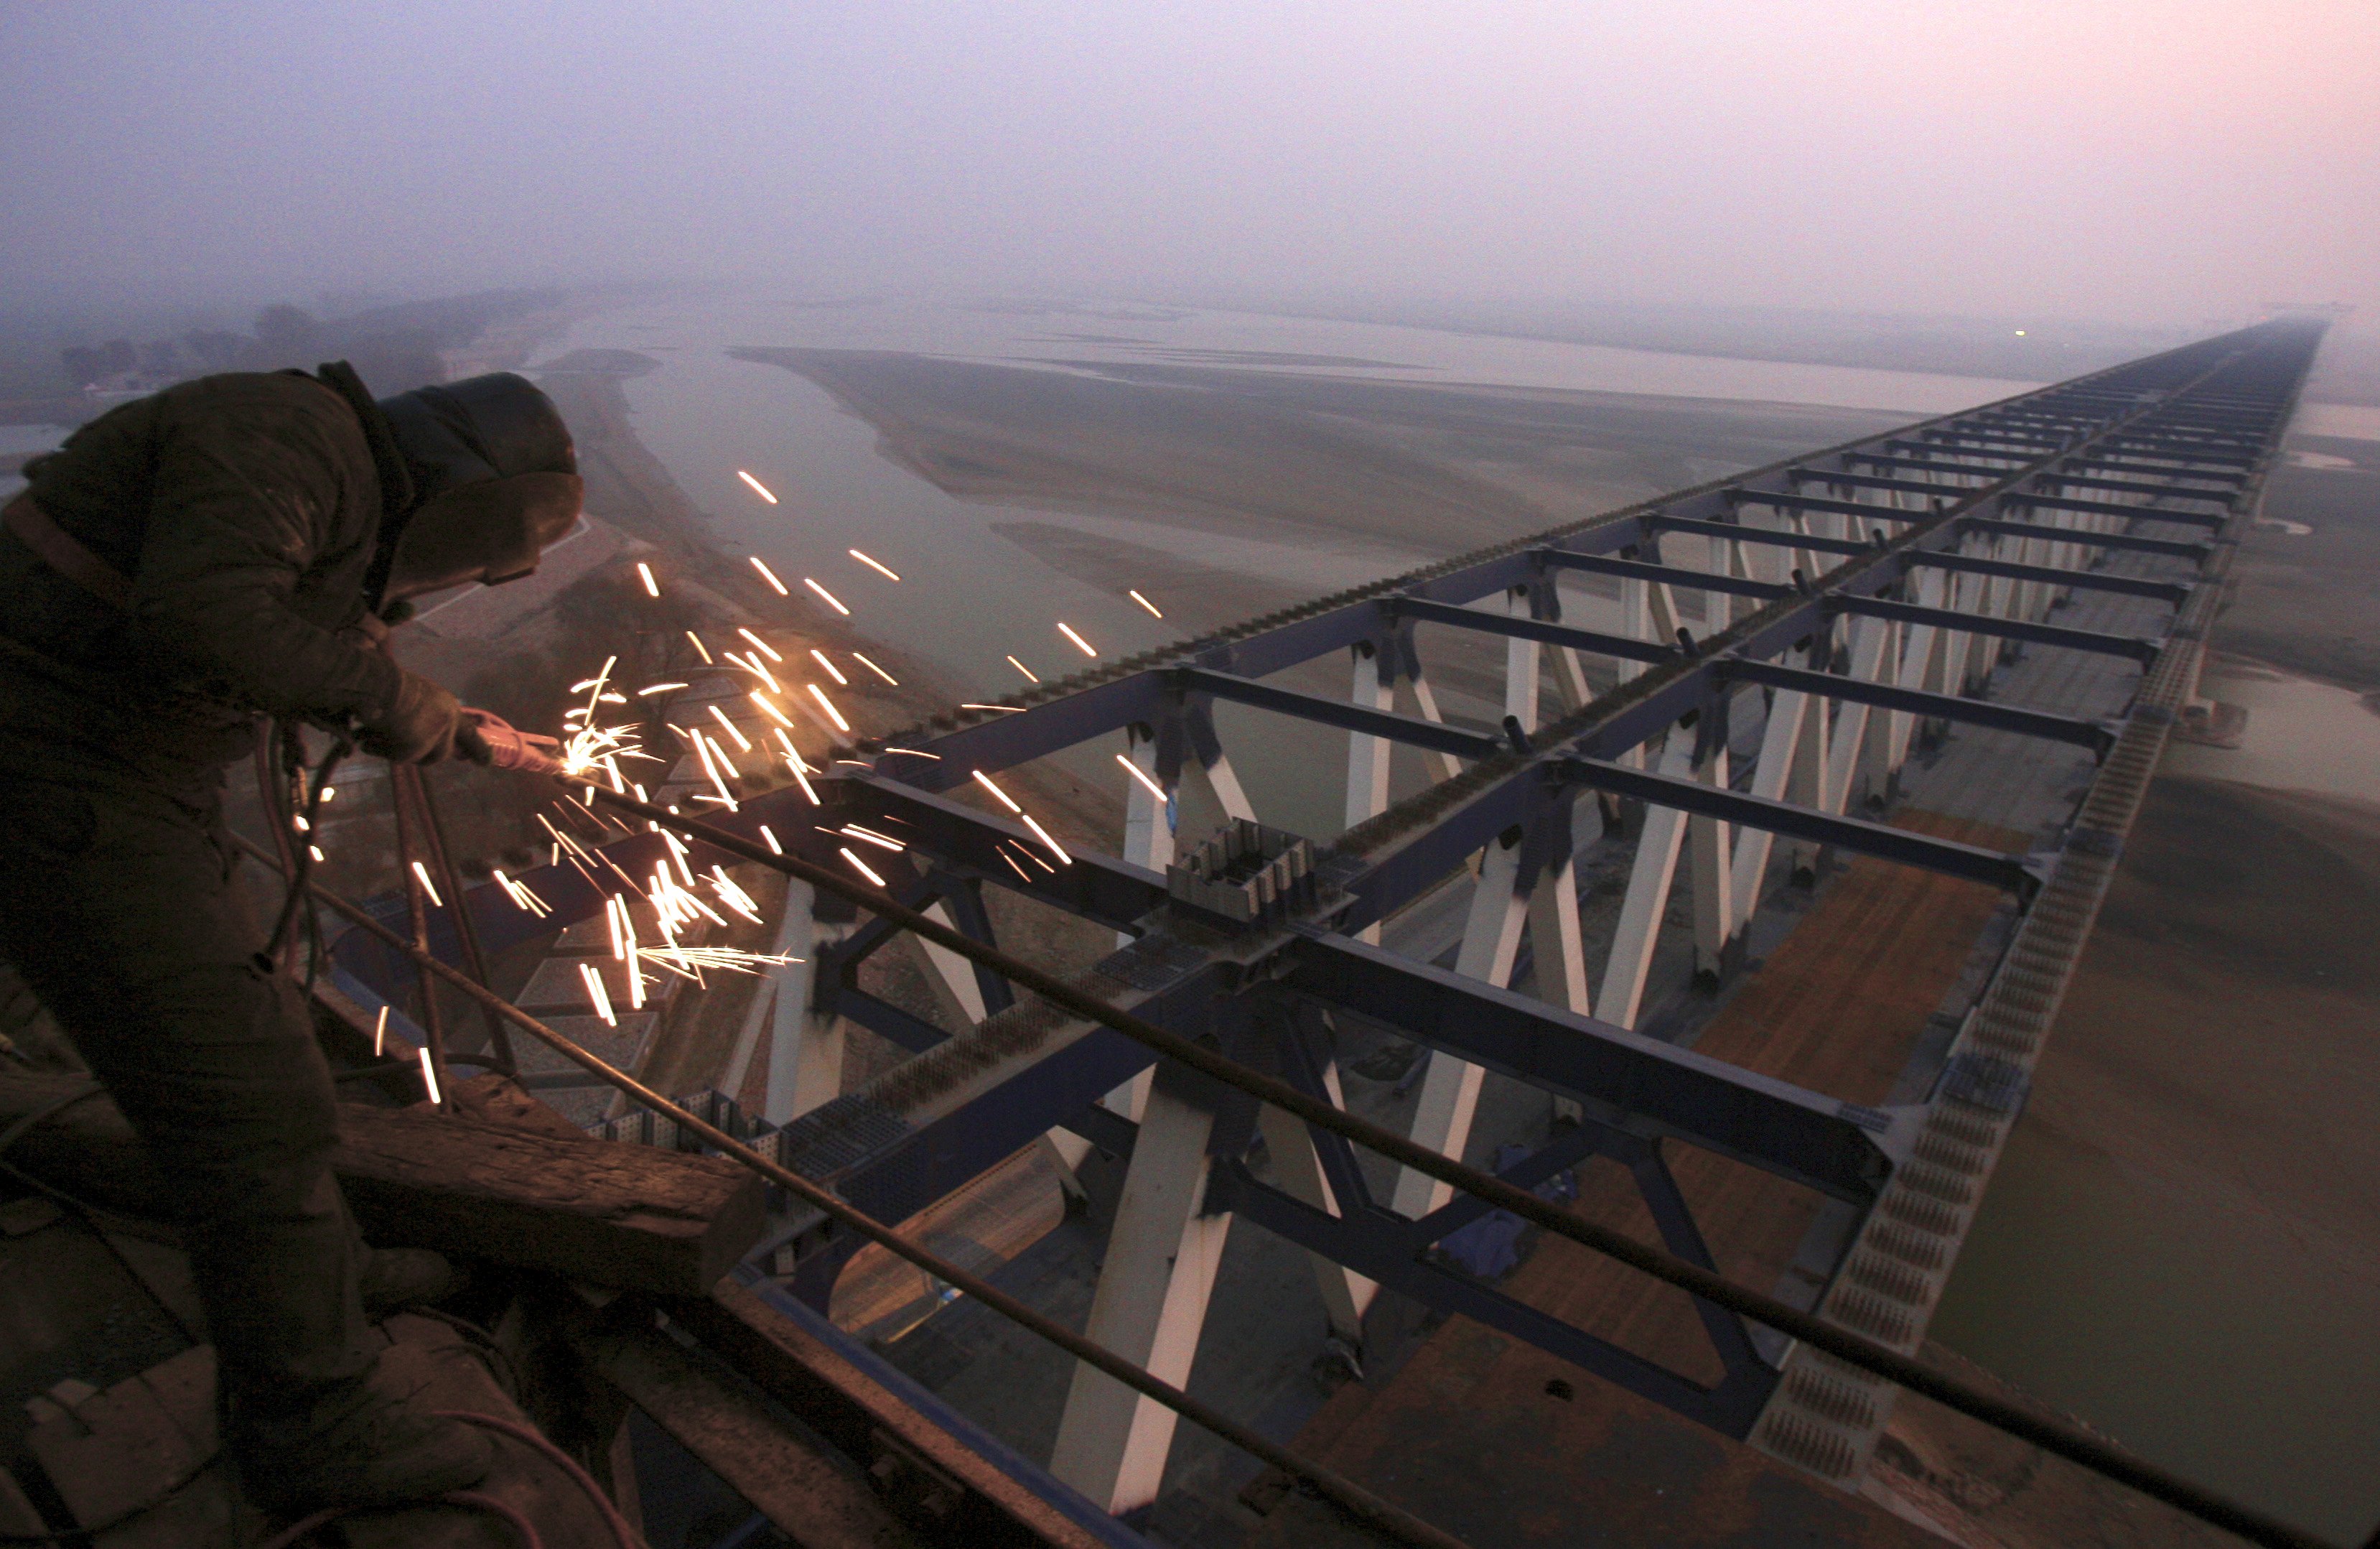 A worker welds steel frames at a construction site of a railway bridge in Zhengzhou, Henan province in this December 17, 2009 file photo. China is expected to release GDP data this week. REUTERS/Donald Chan/Files GLOBAL BUSINESS WEEK AHEAD PACKAGE - SEARCH "BUSINESS WEEK AHEAD JANUARY 18" FOR ALL IMAGES